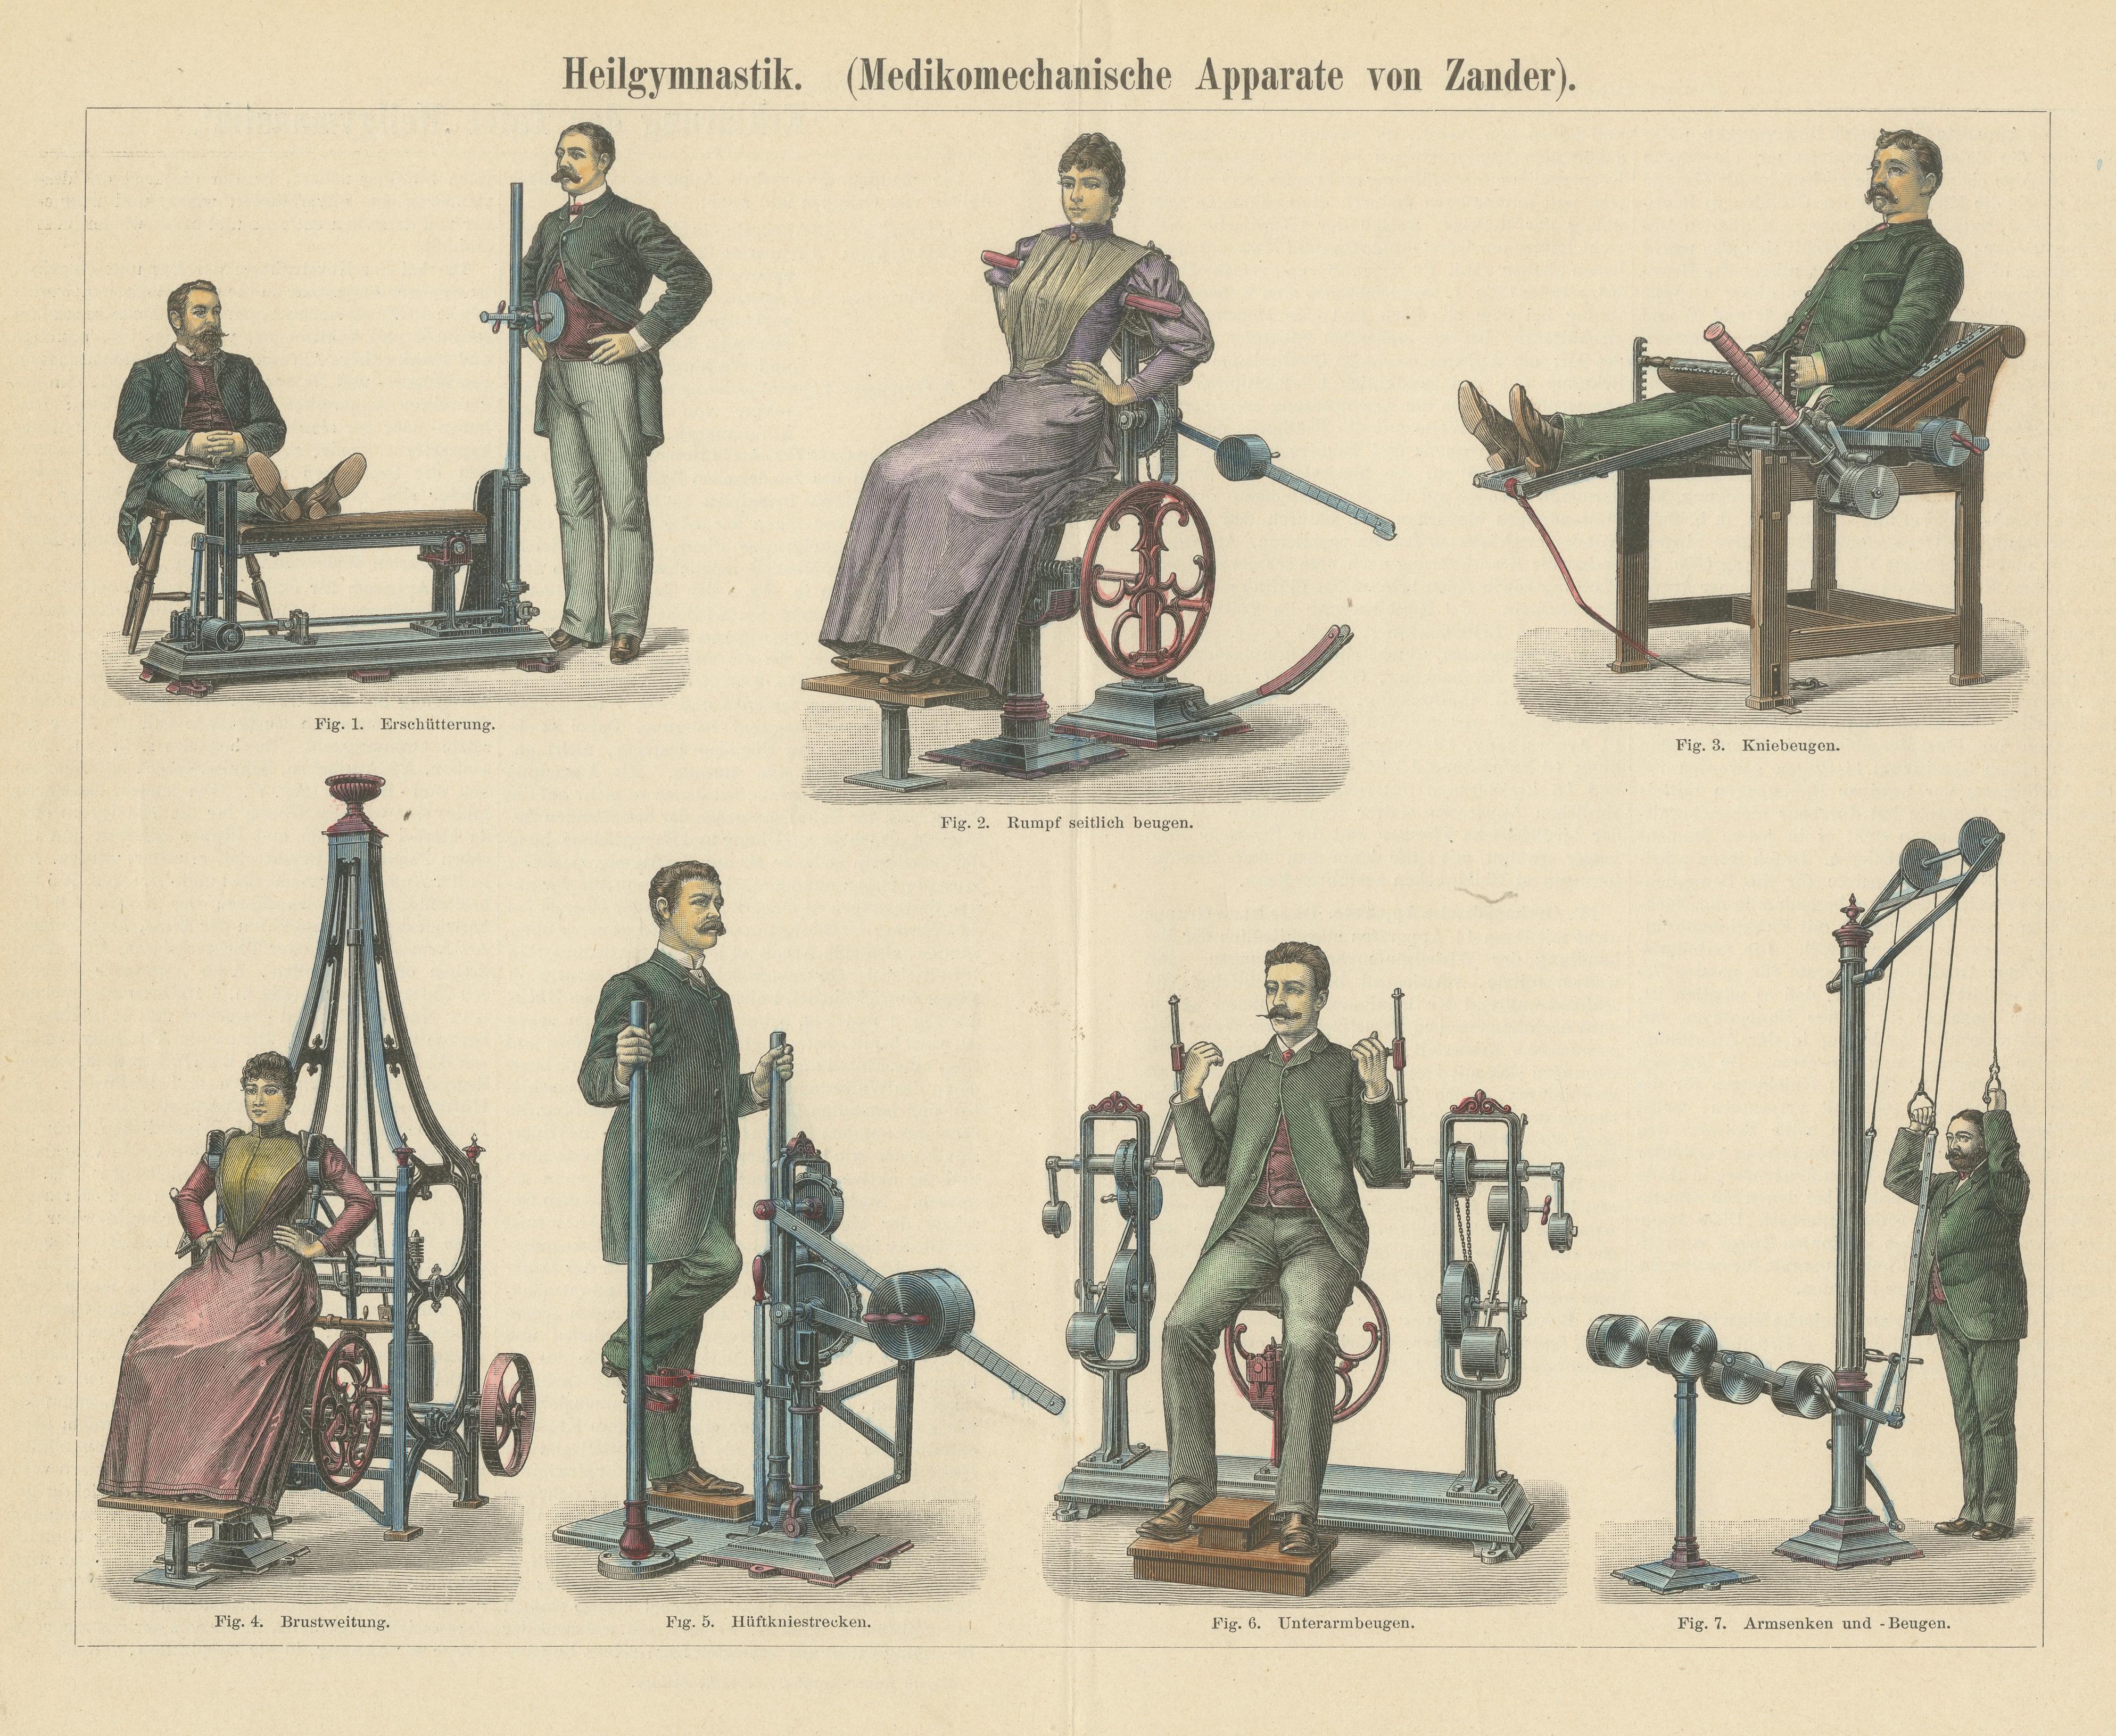 Paper Original Antique Print of Remedial Gymnastics or Fitness Equipment, 1897 For Sale